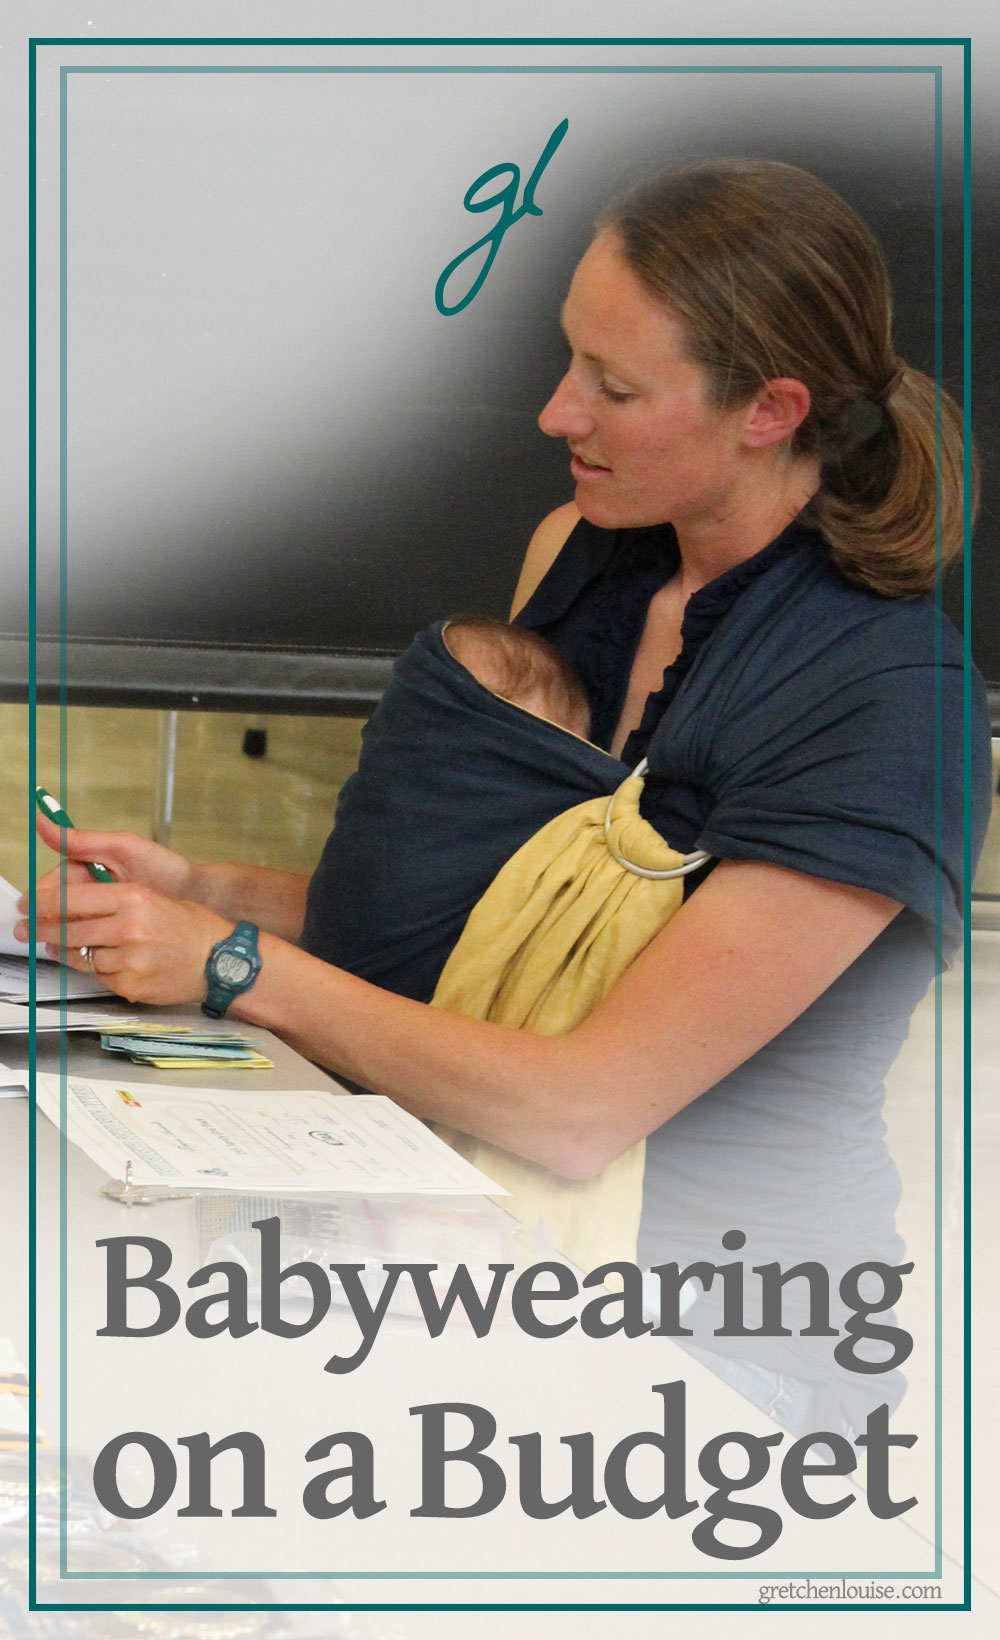 Babywearing can be expensive. But it doesn’t have to break the bank.

If you have entered every giveaway for every brand of carrier, and have finally given up on winning one for free, here are some suggestions on how to babywear on a budget. via @GretLouise